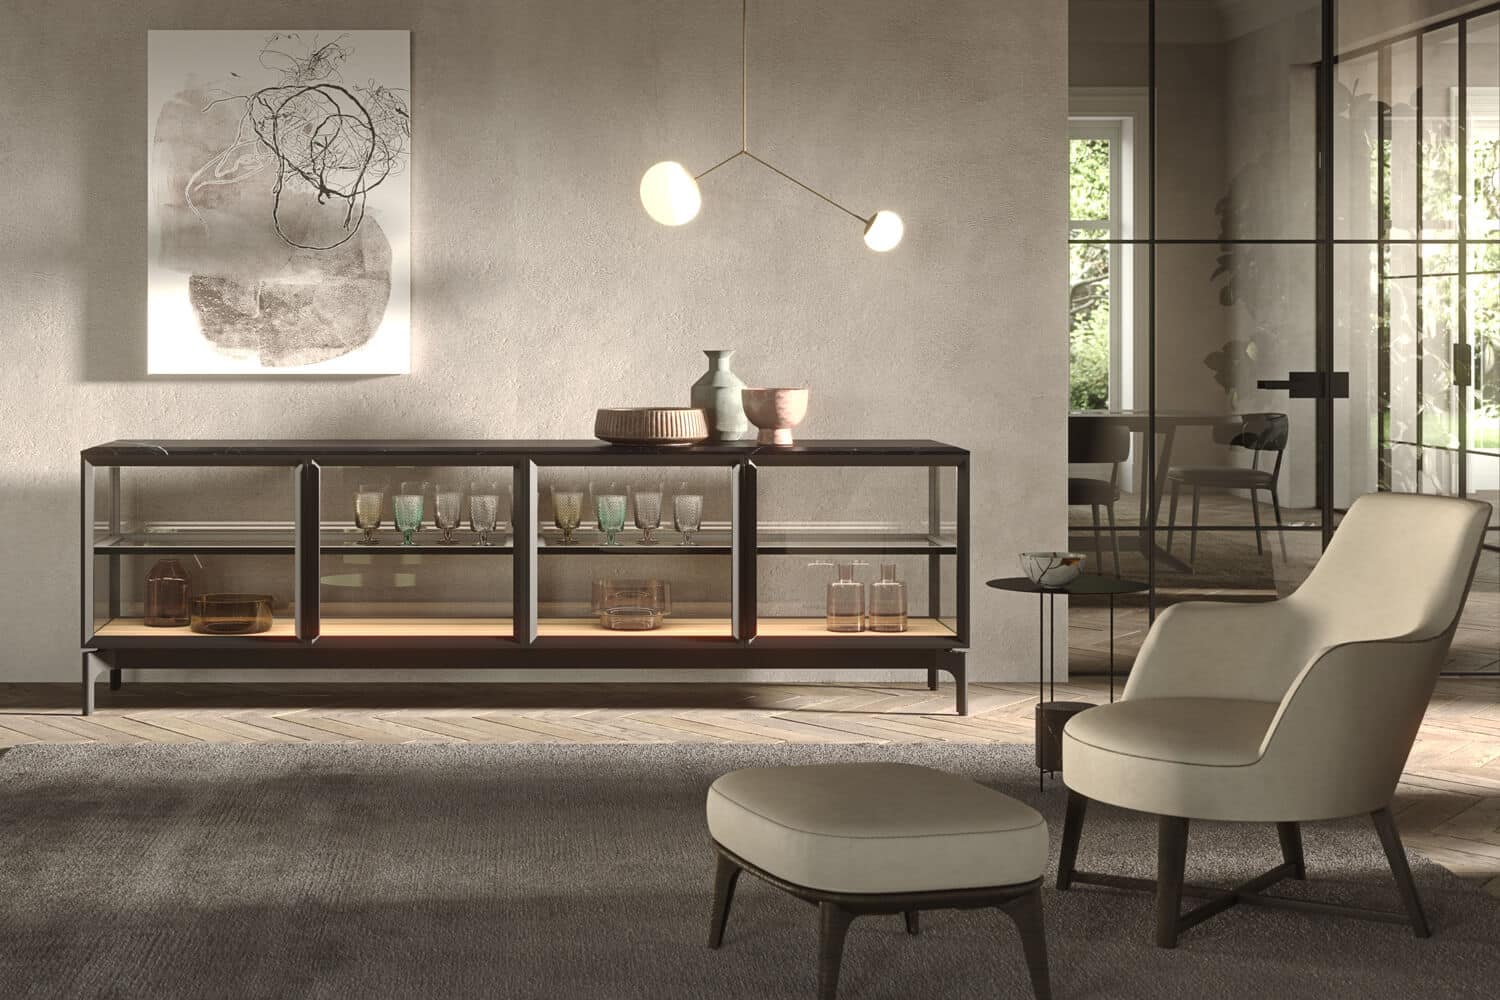 <strong>2018</strong> | Dario Snaidero and his Team introduce ELEGANTE Bespoke, a new collection developed for the American market that includes a Sideboard system.